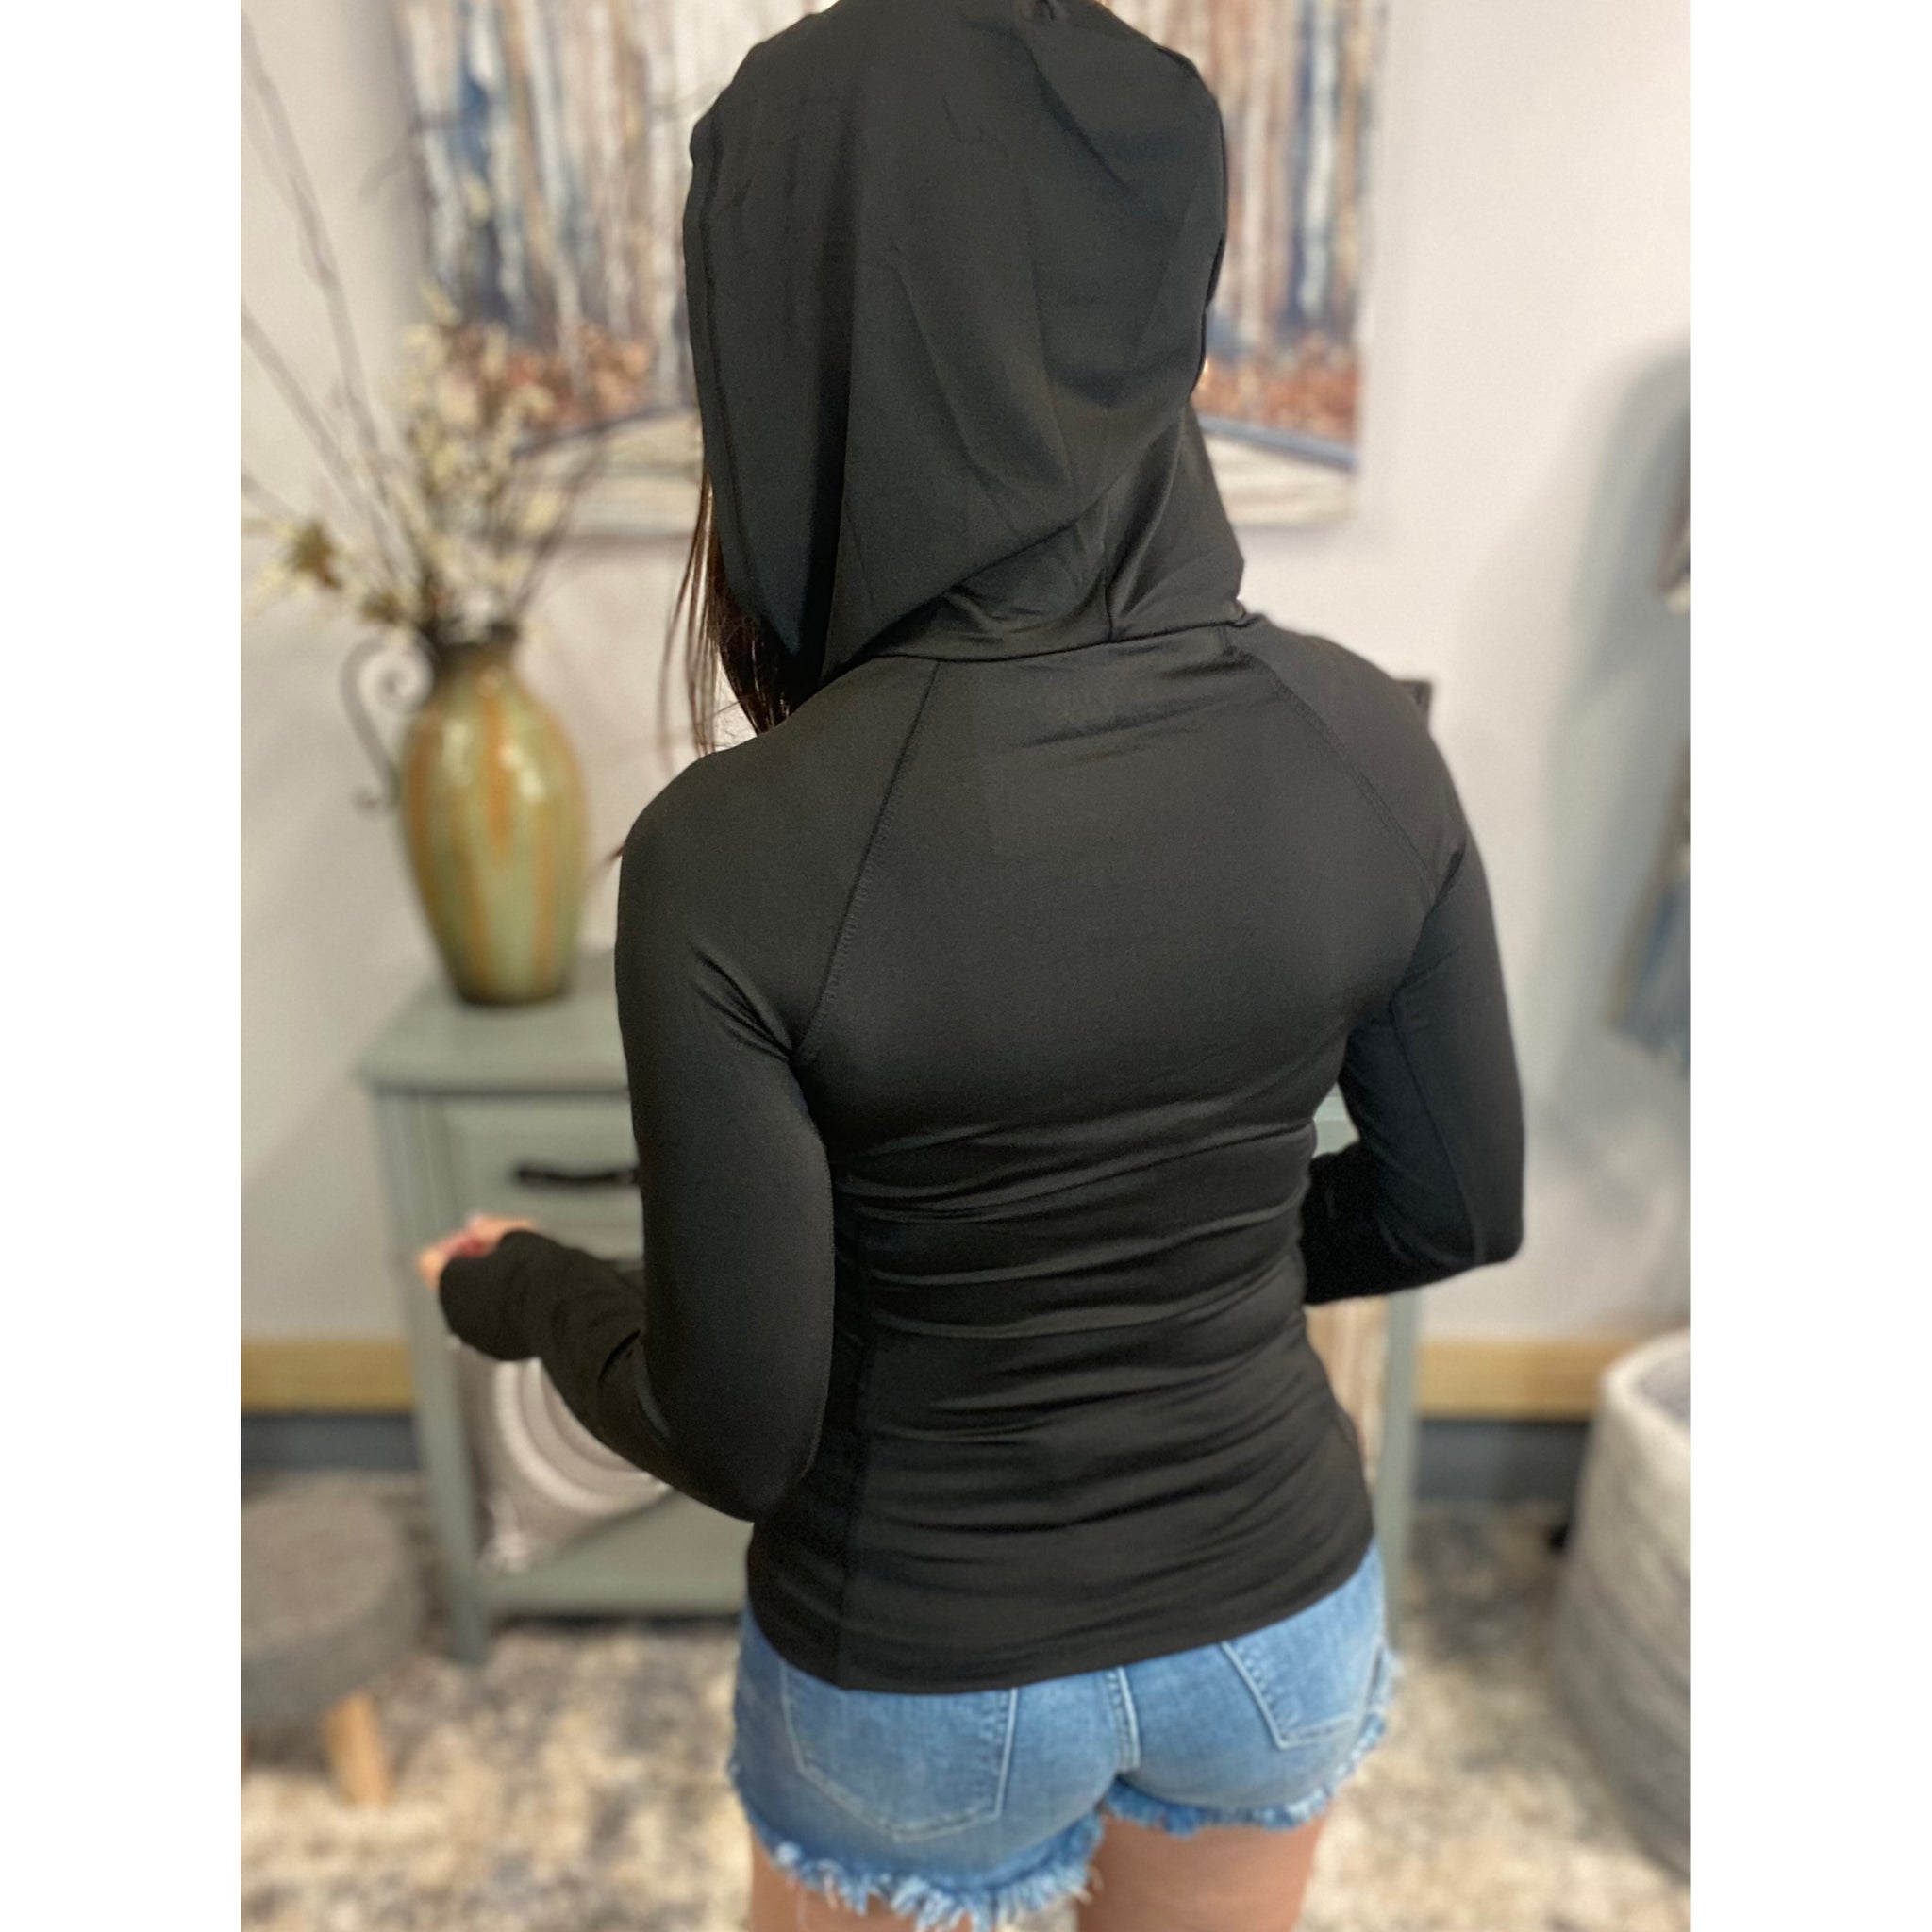 “Can’t Blame a Girl” Sexy Sporty Slimming Seamless Zipper Lightweight Hoodie Jacket Pockets Black S/M/L